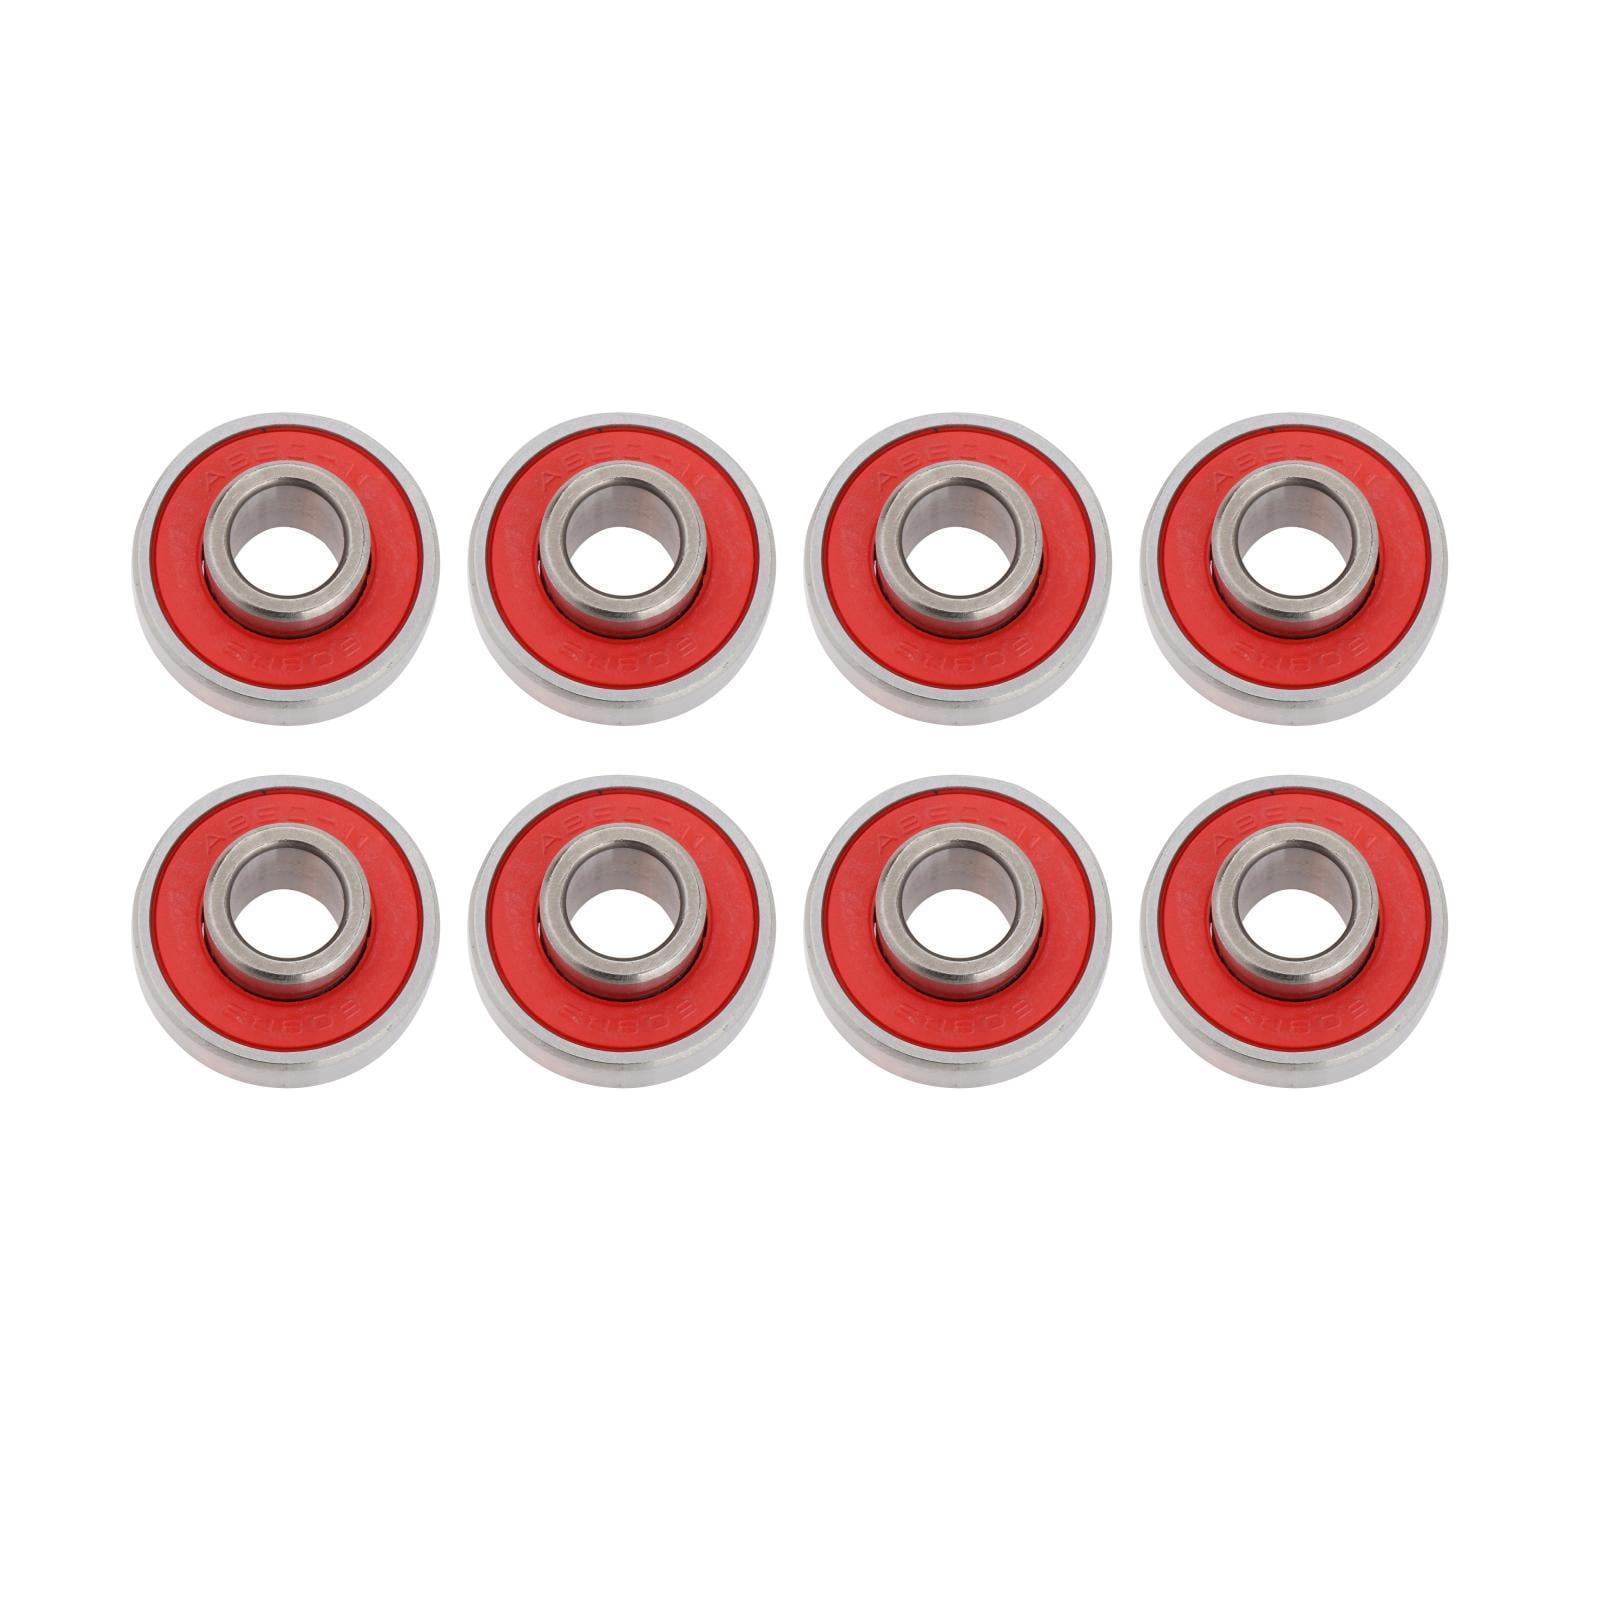 MAGLINER 18055 Sealed Ball Bearing,Steel,Silver/Red 